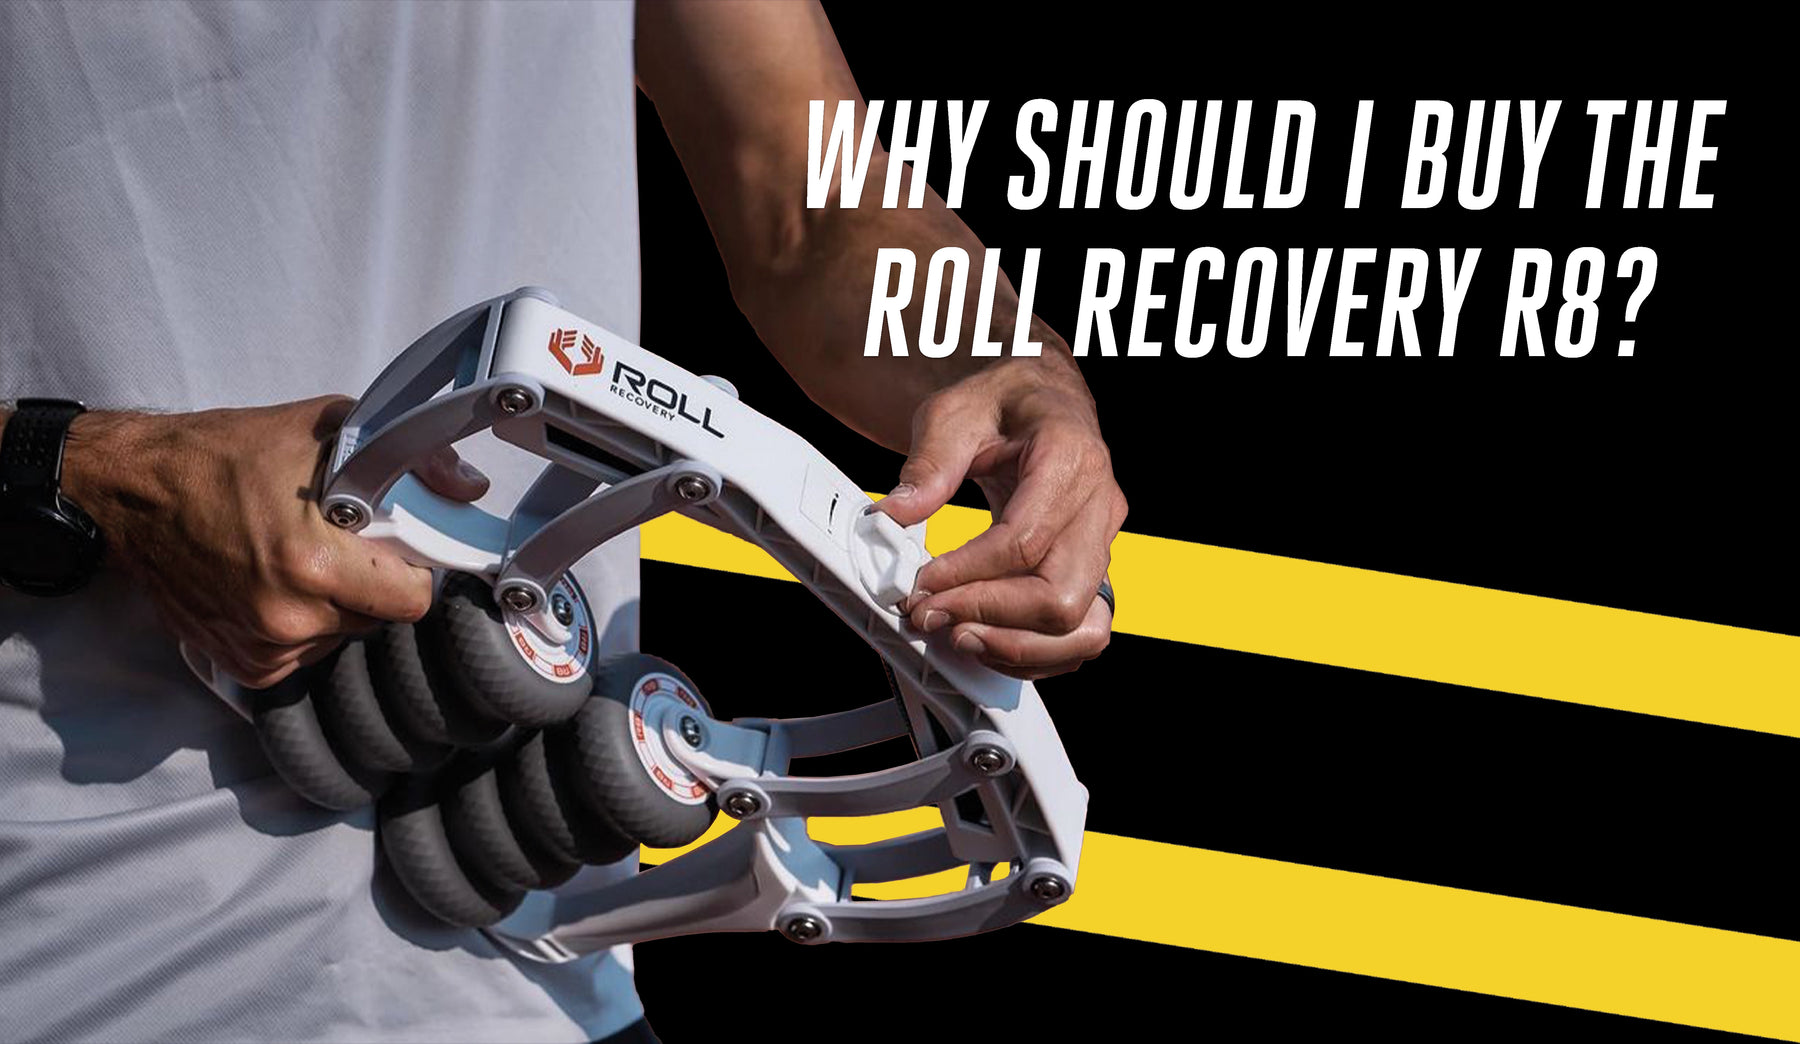 Why should I buy a Roll Recovery R8?